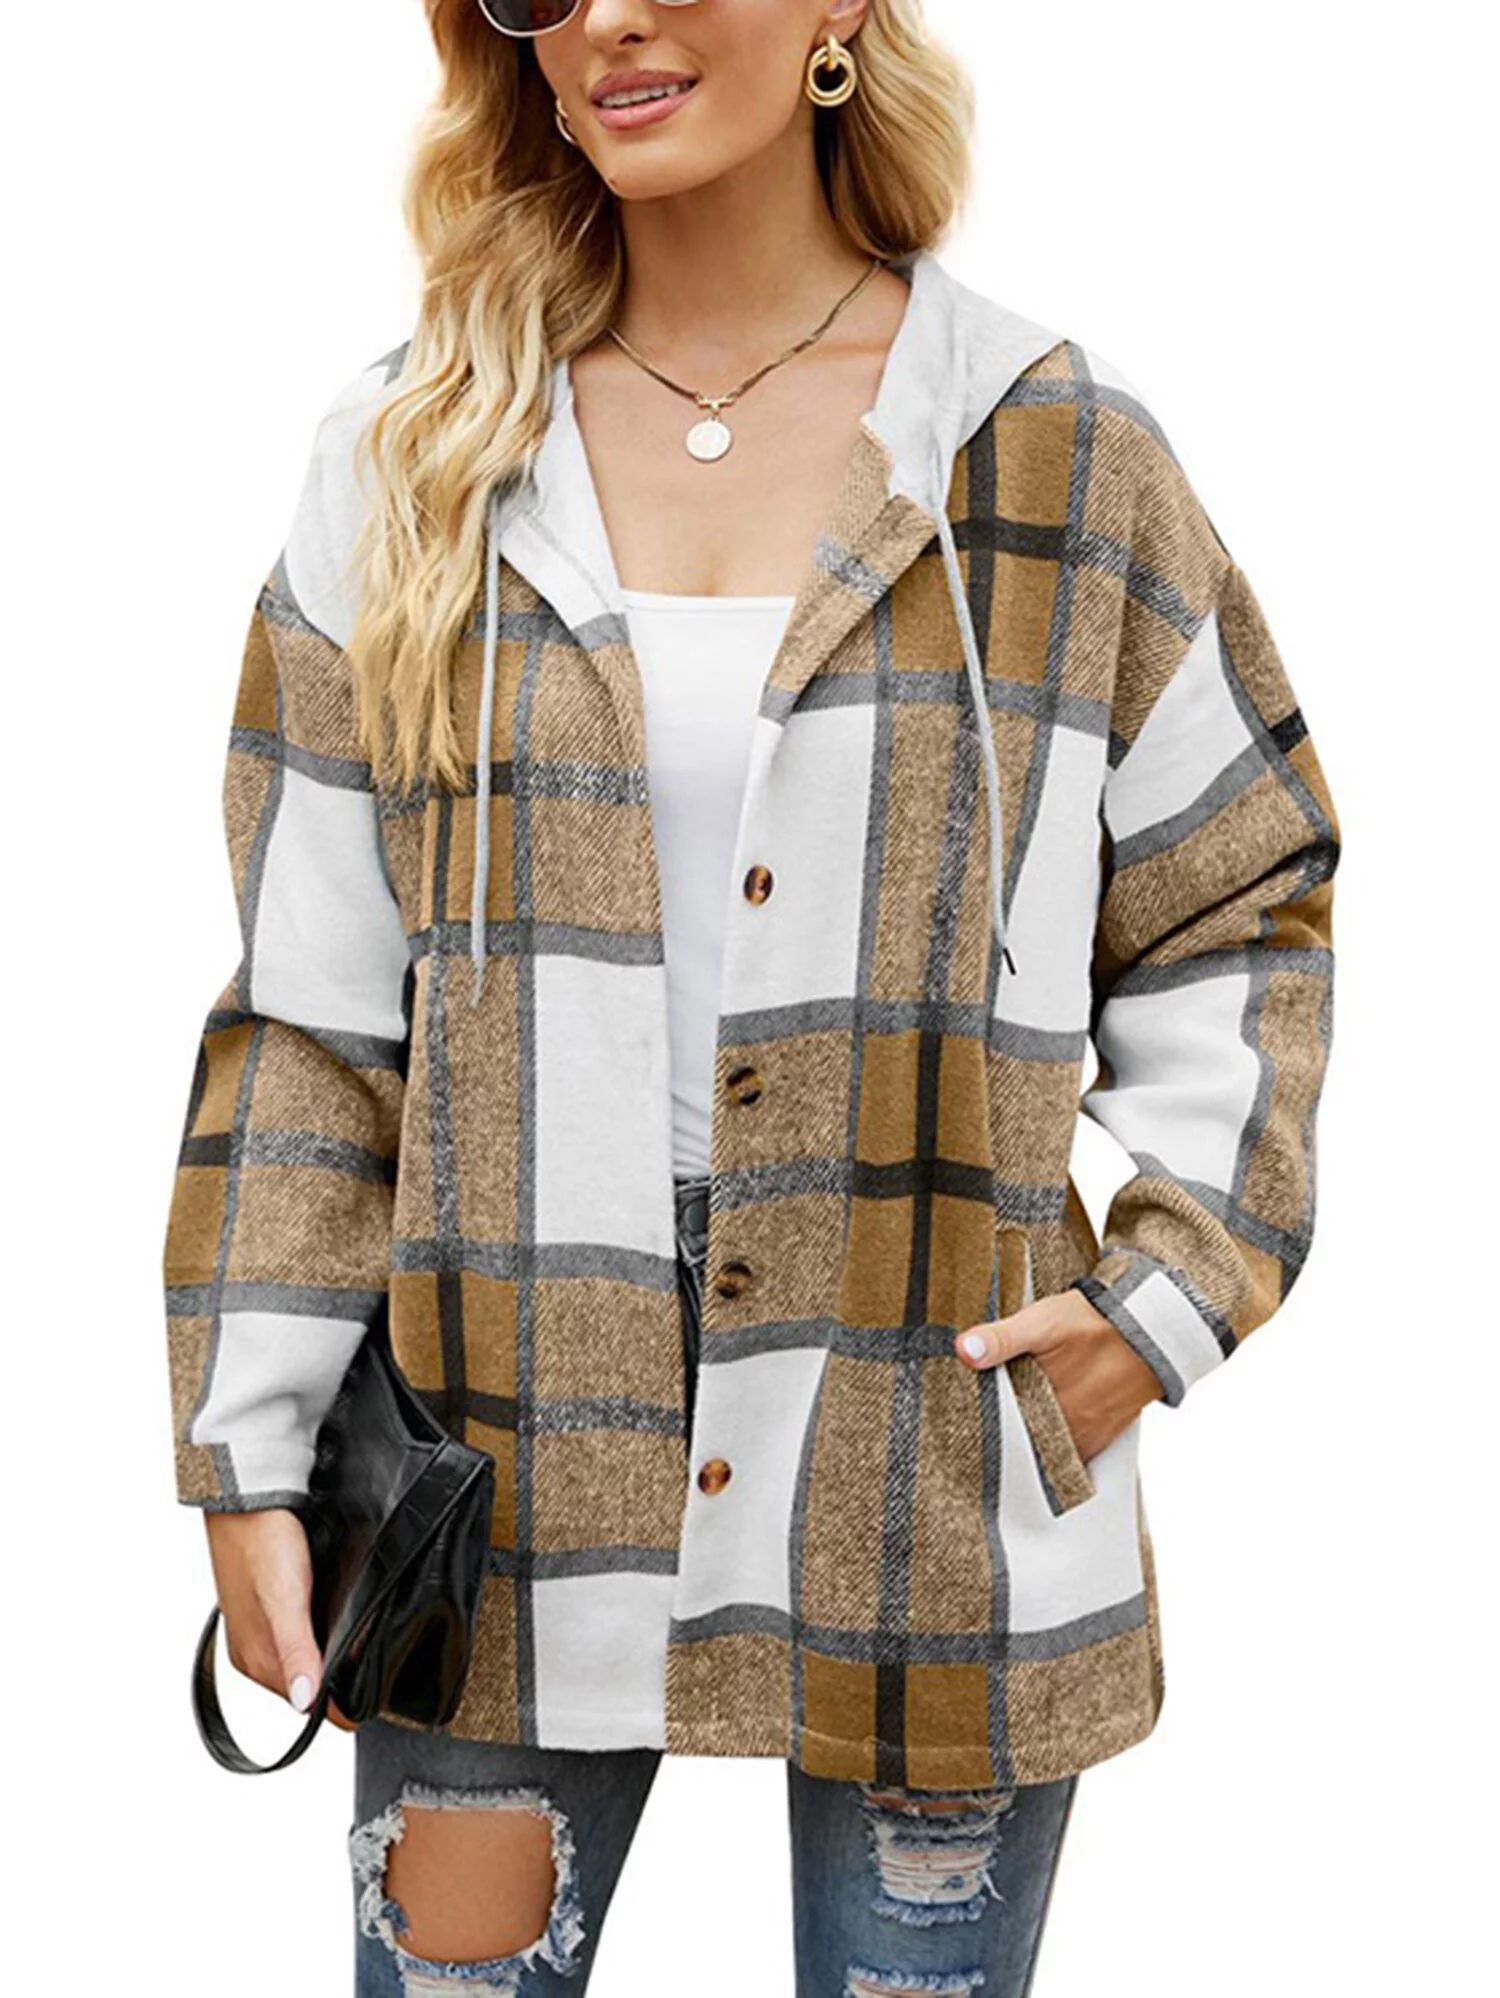 Fantaslook Flannel Shirts for Women Button Down Plaid Shirt Hooded Shacket Jacket with Pocket | Walmart (US)